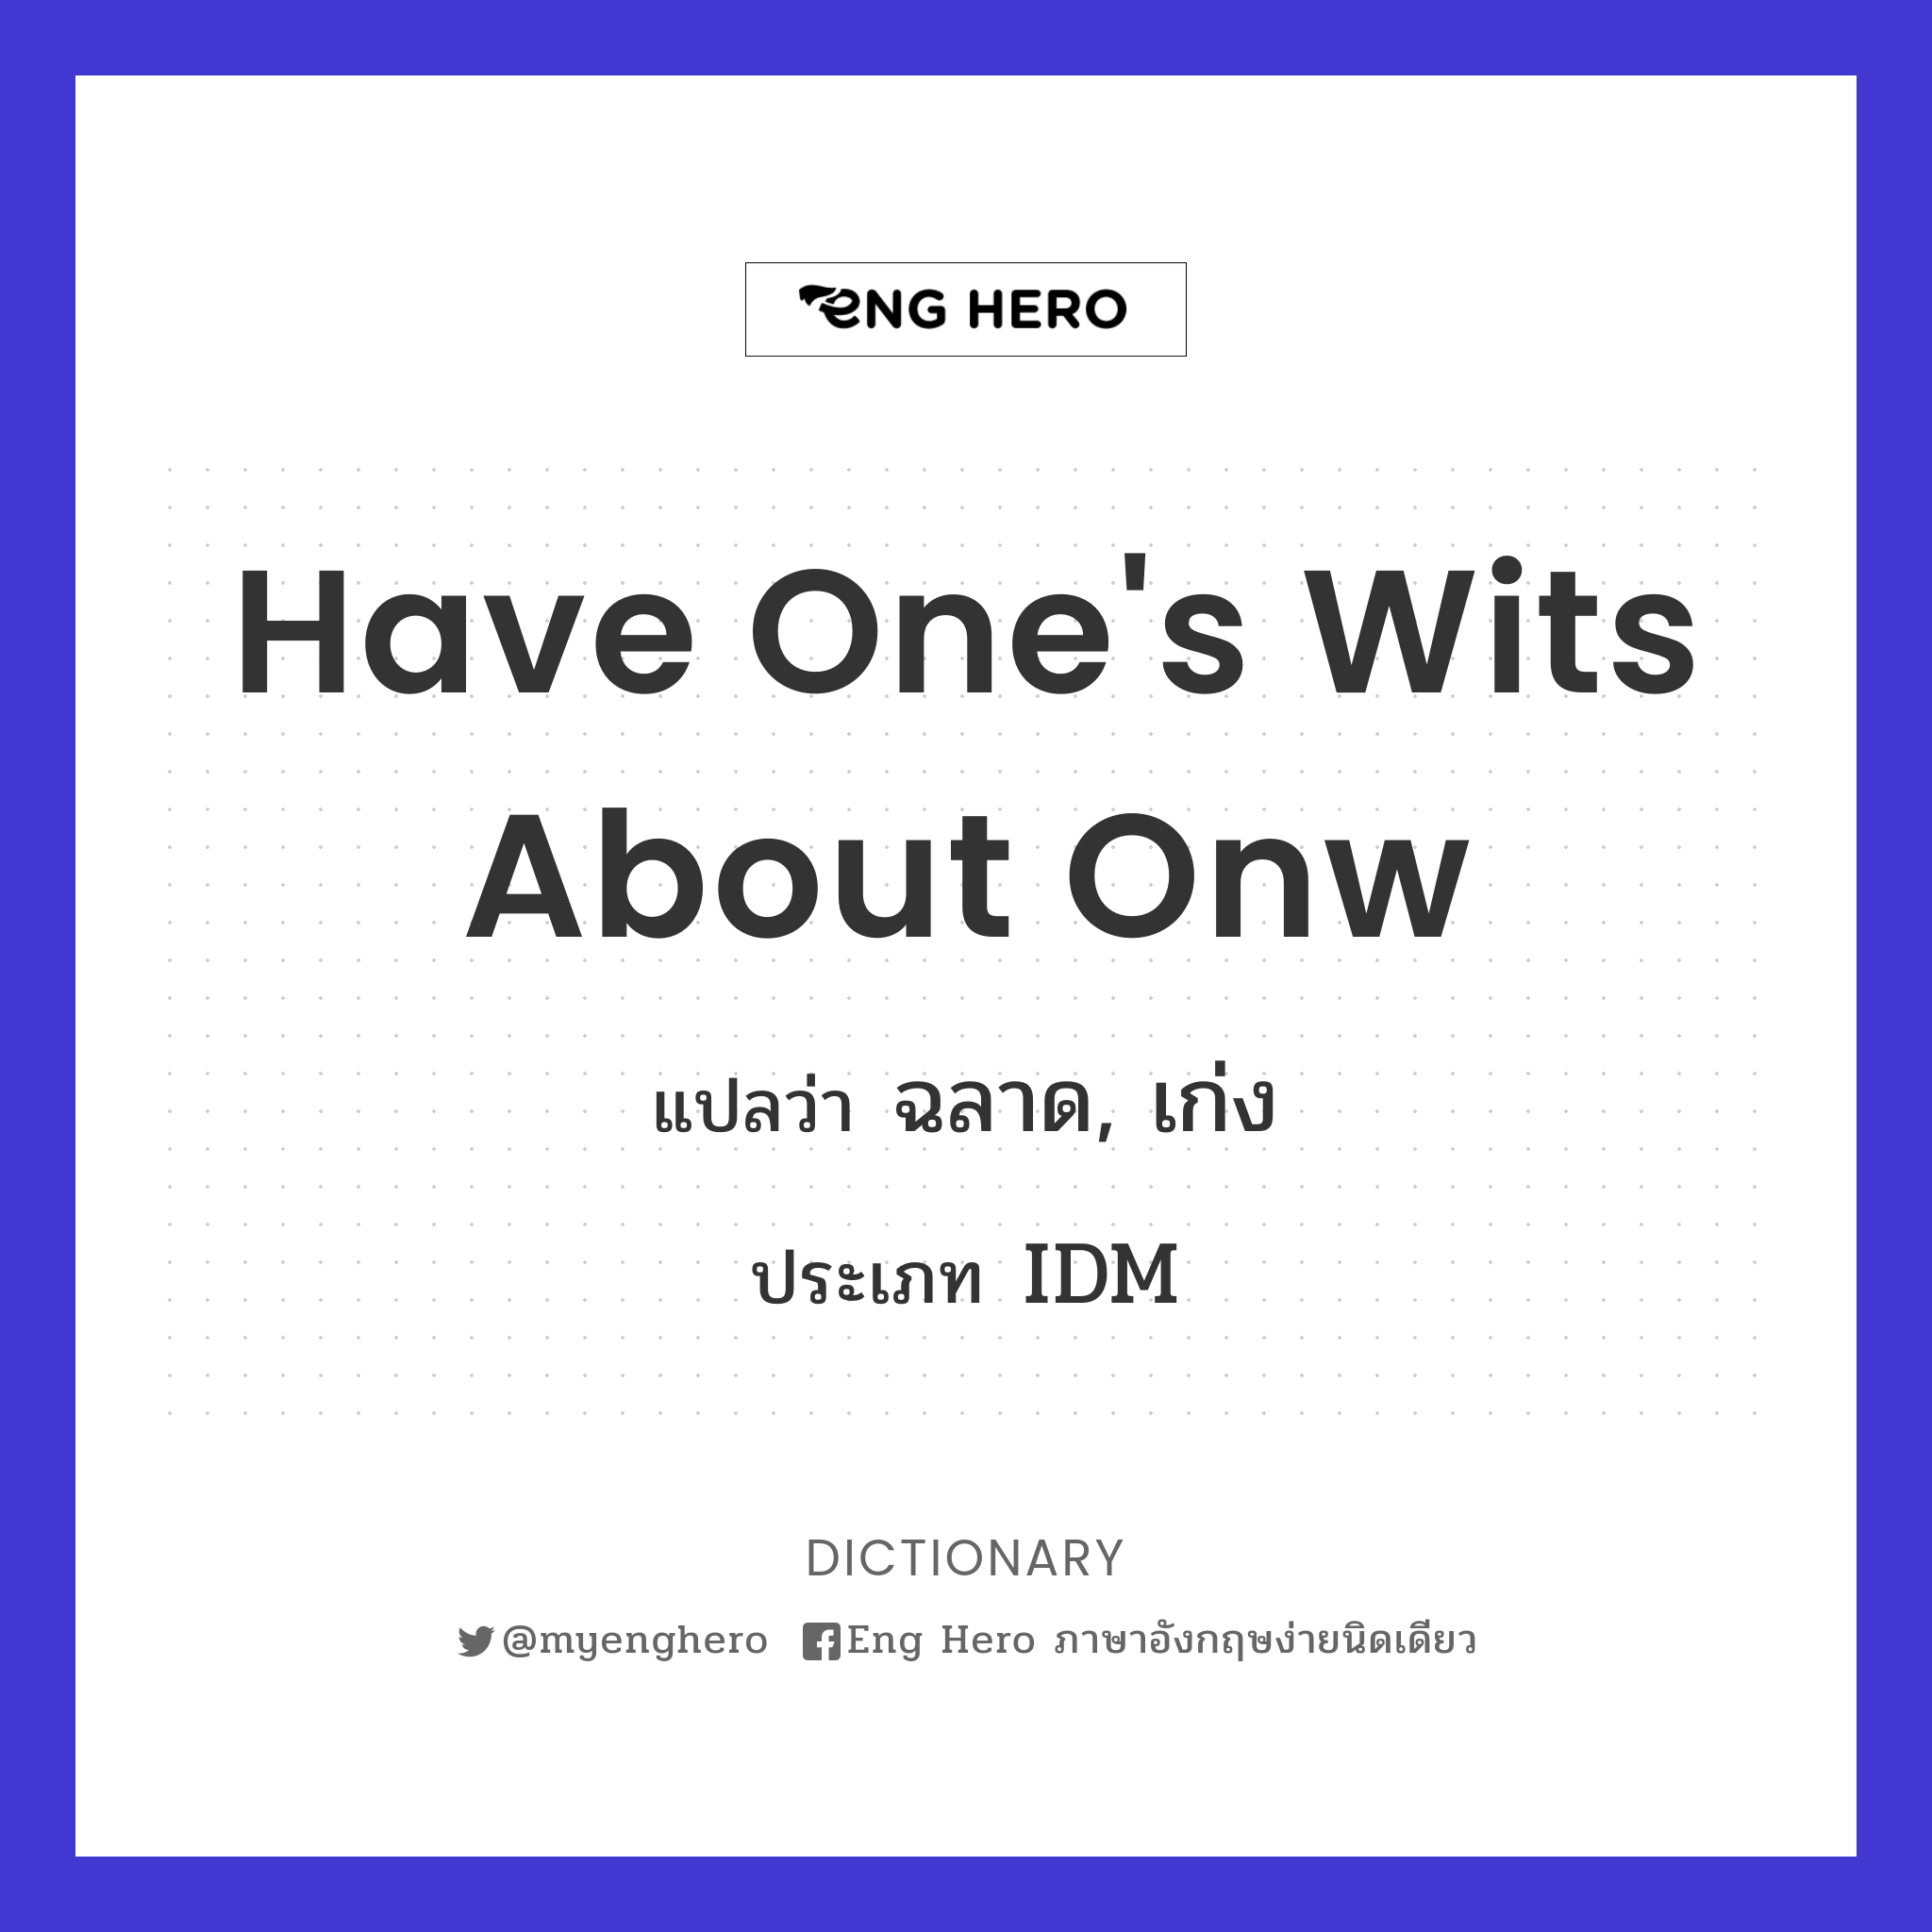 have one's wits about onw